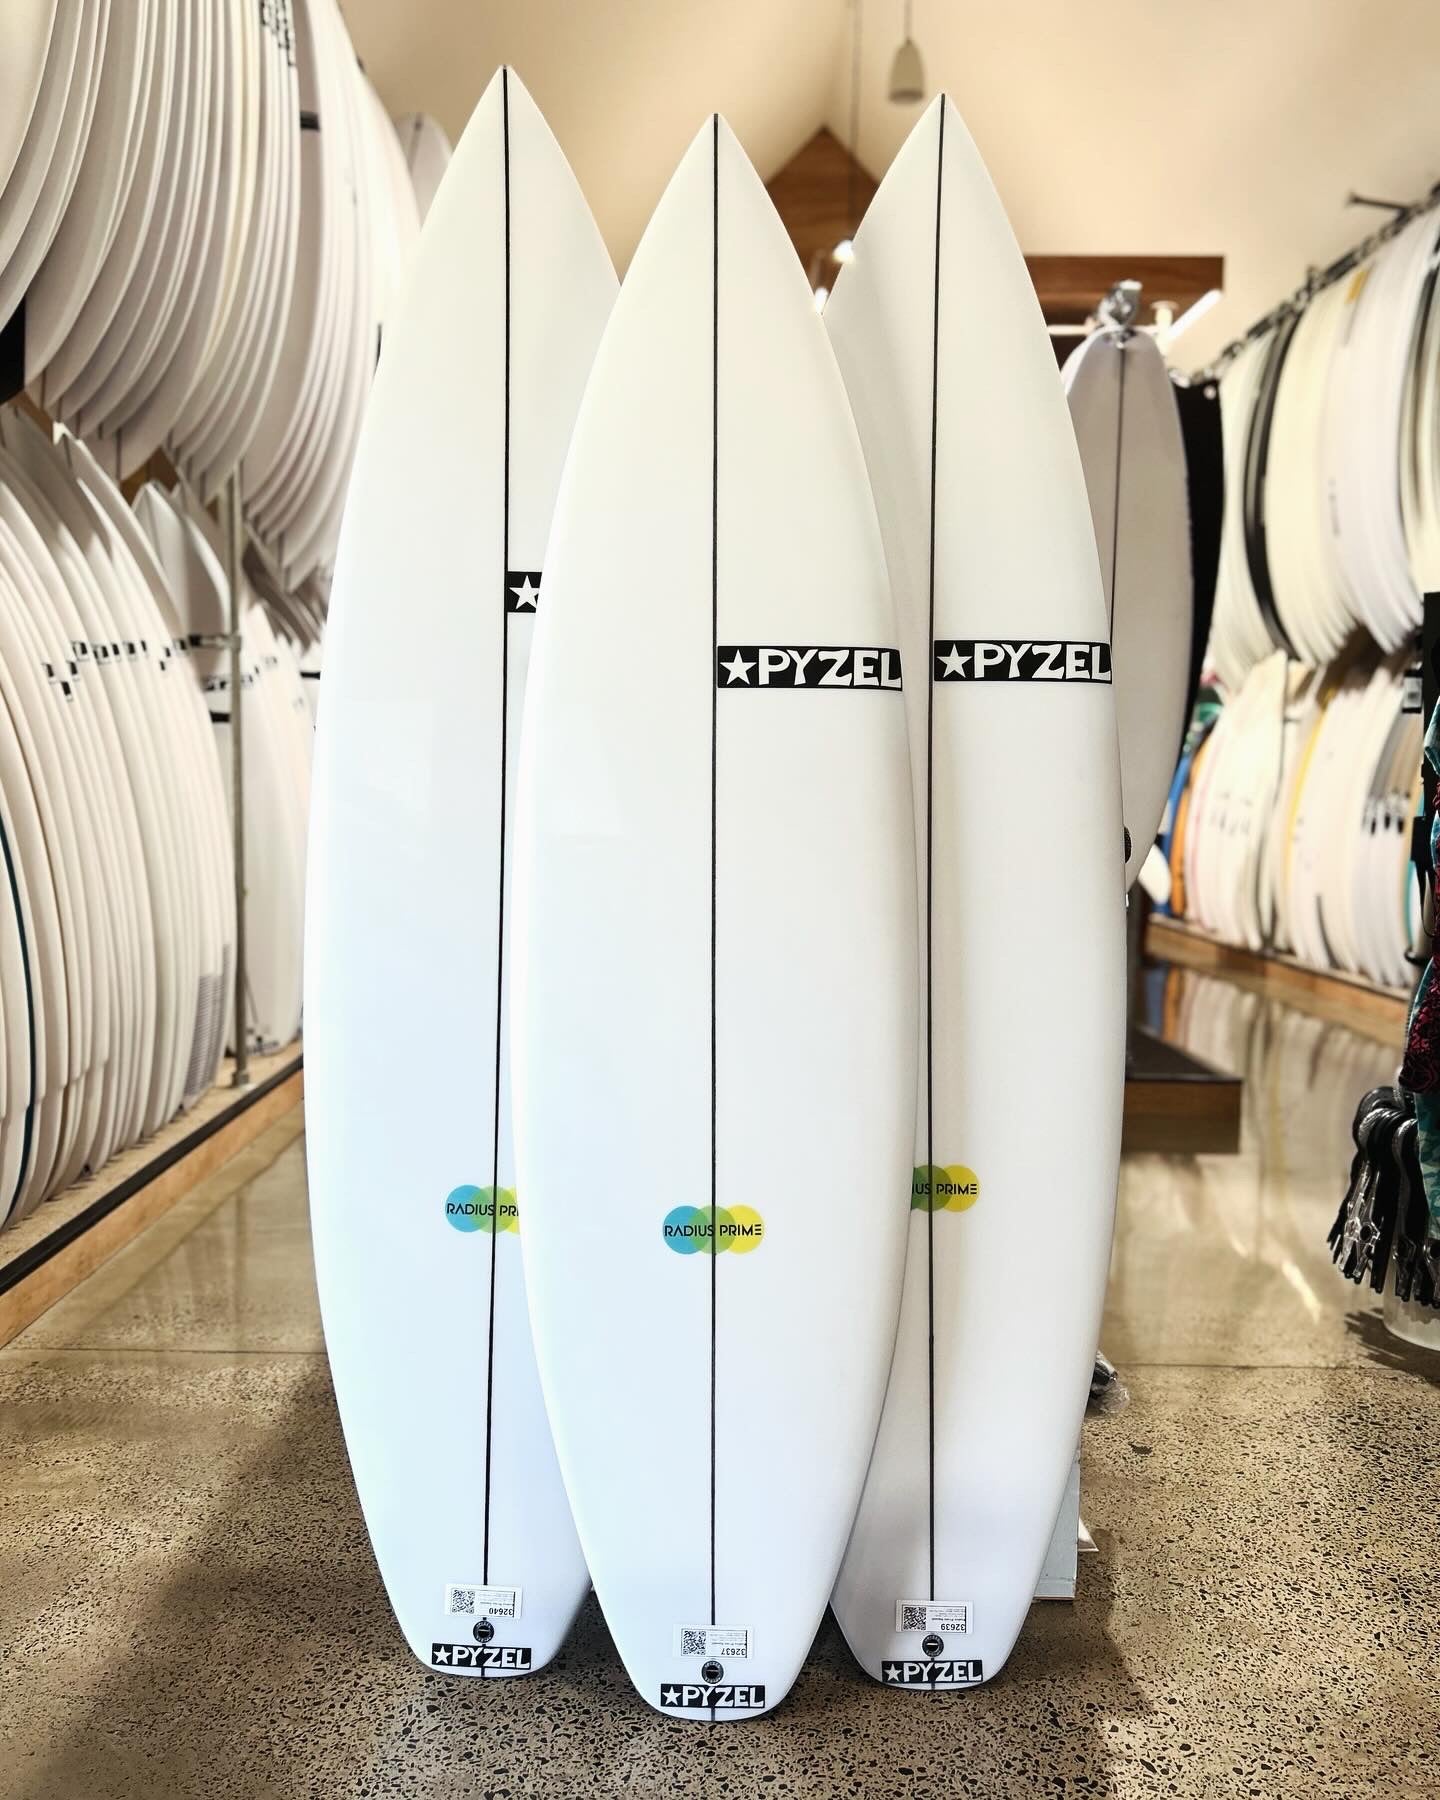 Pyzel 'Radius Prime' - Board Store PyzelSurfboard  